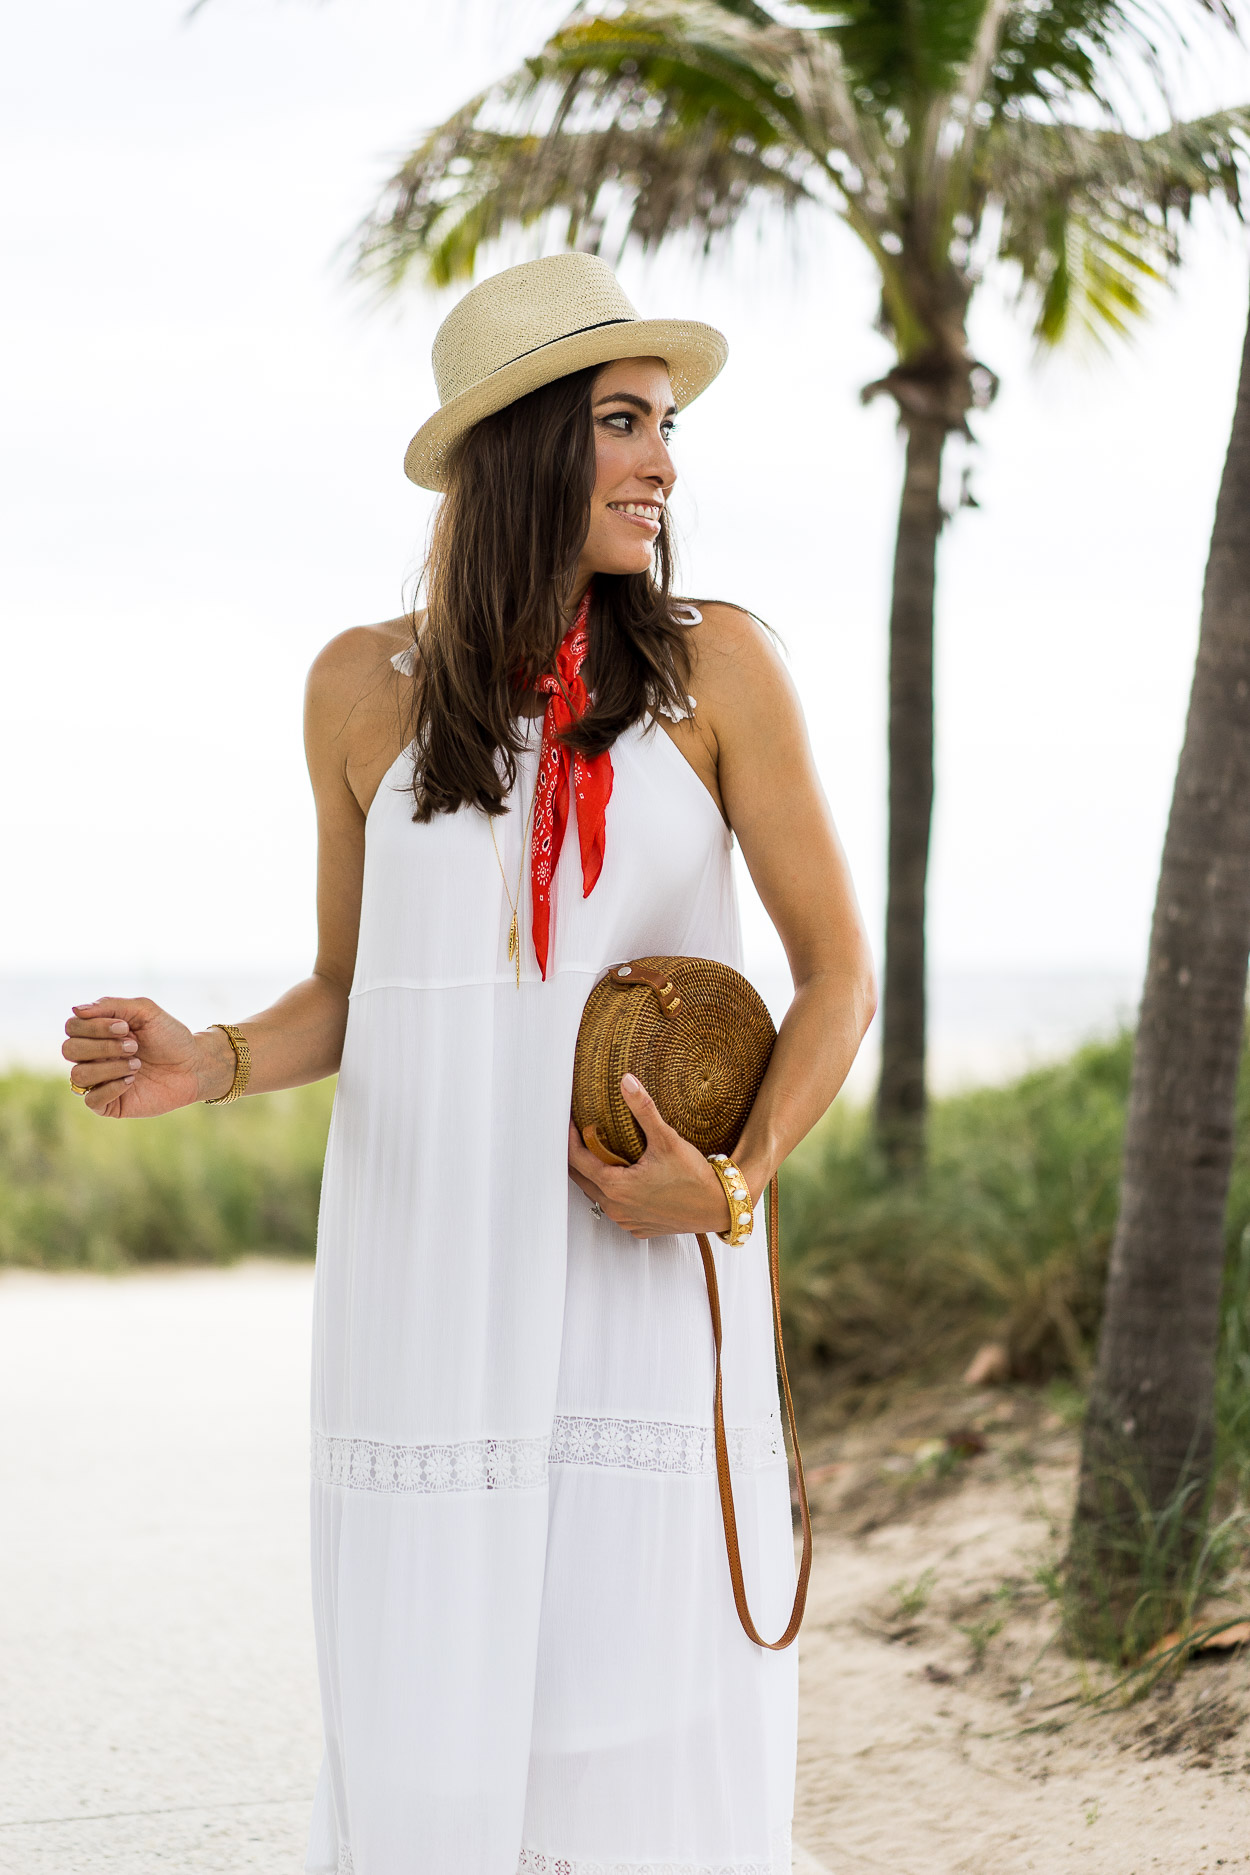 Summer fashion with #oldnavystyle worn by Amanda of A Glam Lifestyle blog in white crochet maxi dress and red bandana with straw hat